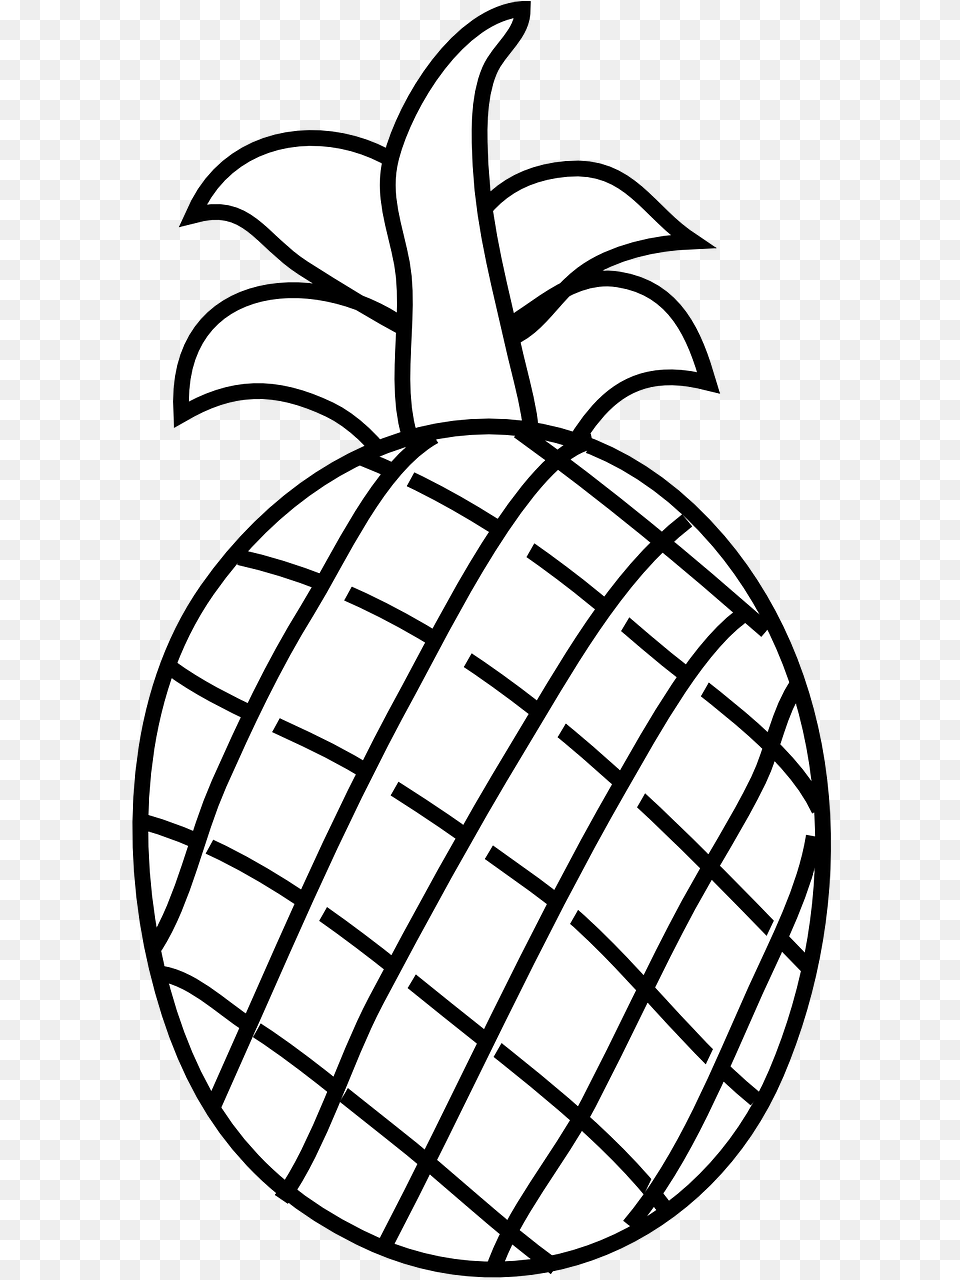 Pineapple Drawing Pineapple Fruit Food Plant Pineapple Clip Art, Produce, Ammunition, Grenade, Weapon Png Image